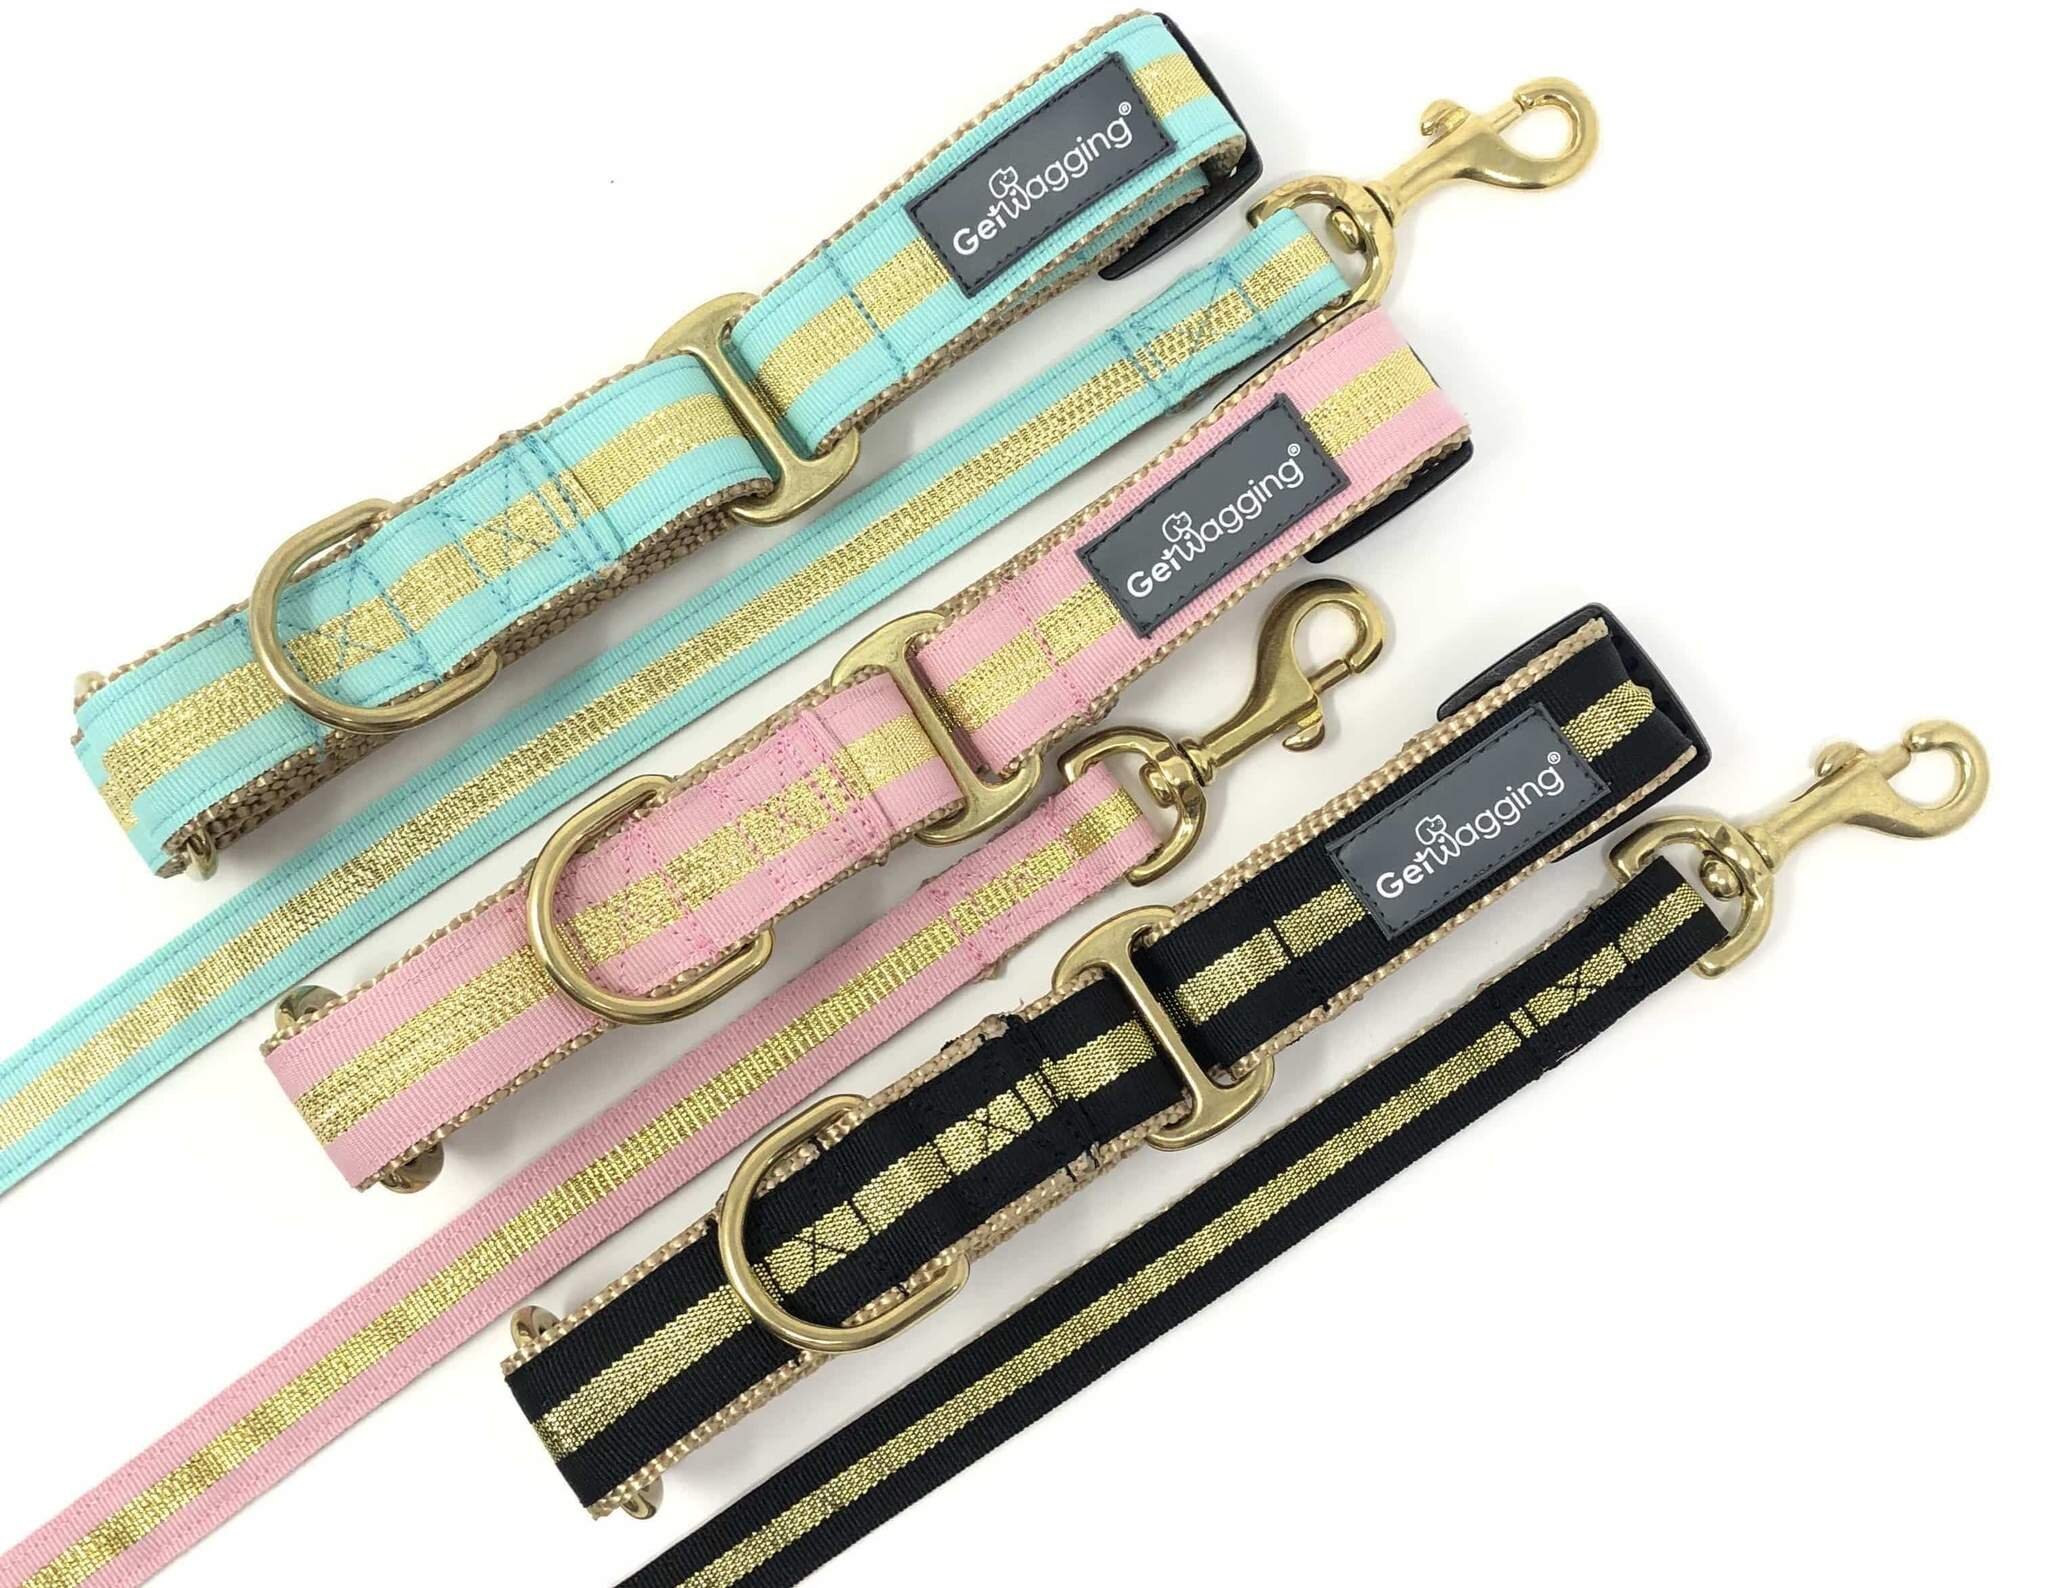 Get Wagging Dog Collar and Leash Sets that Give Back